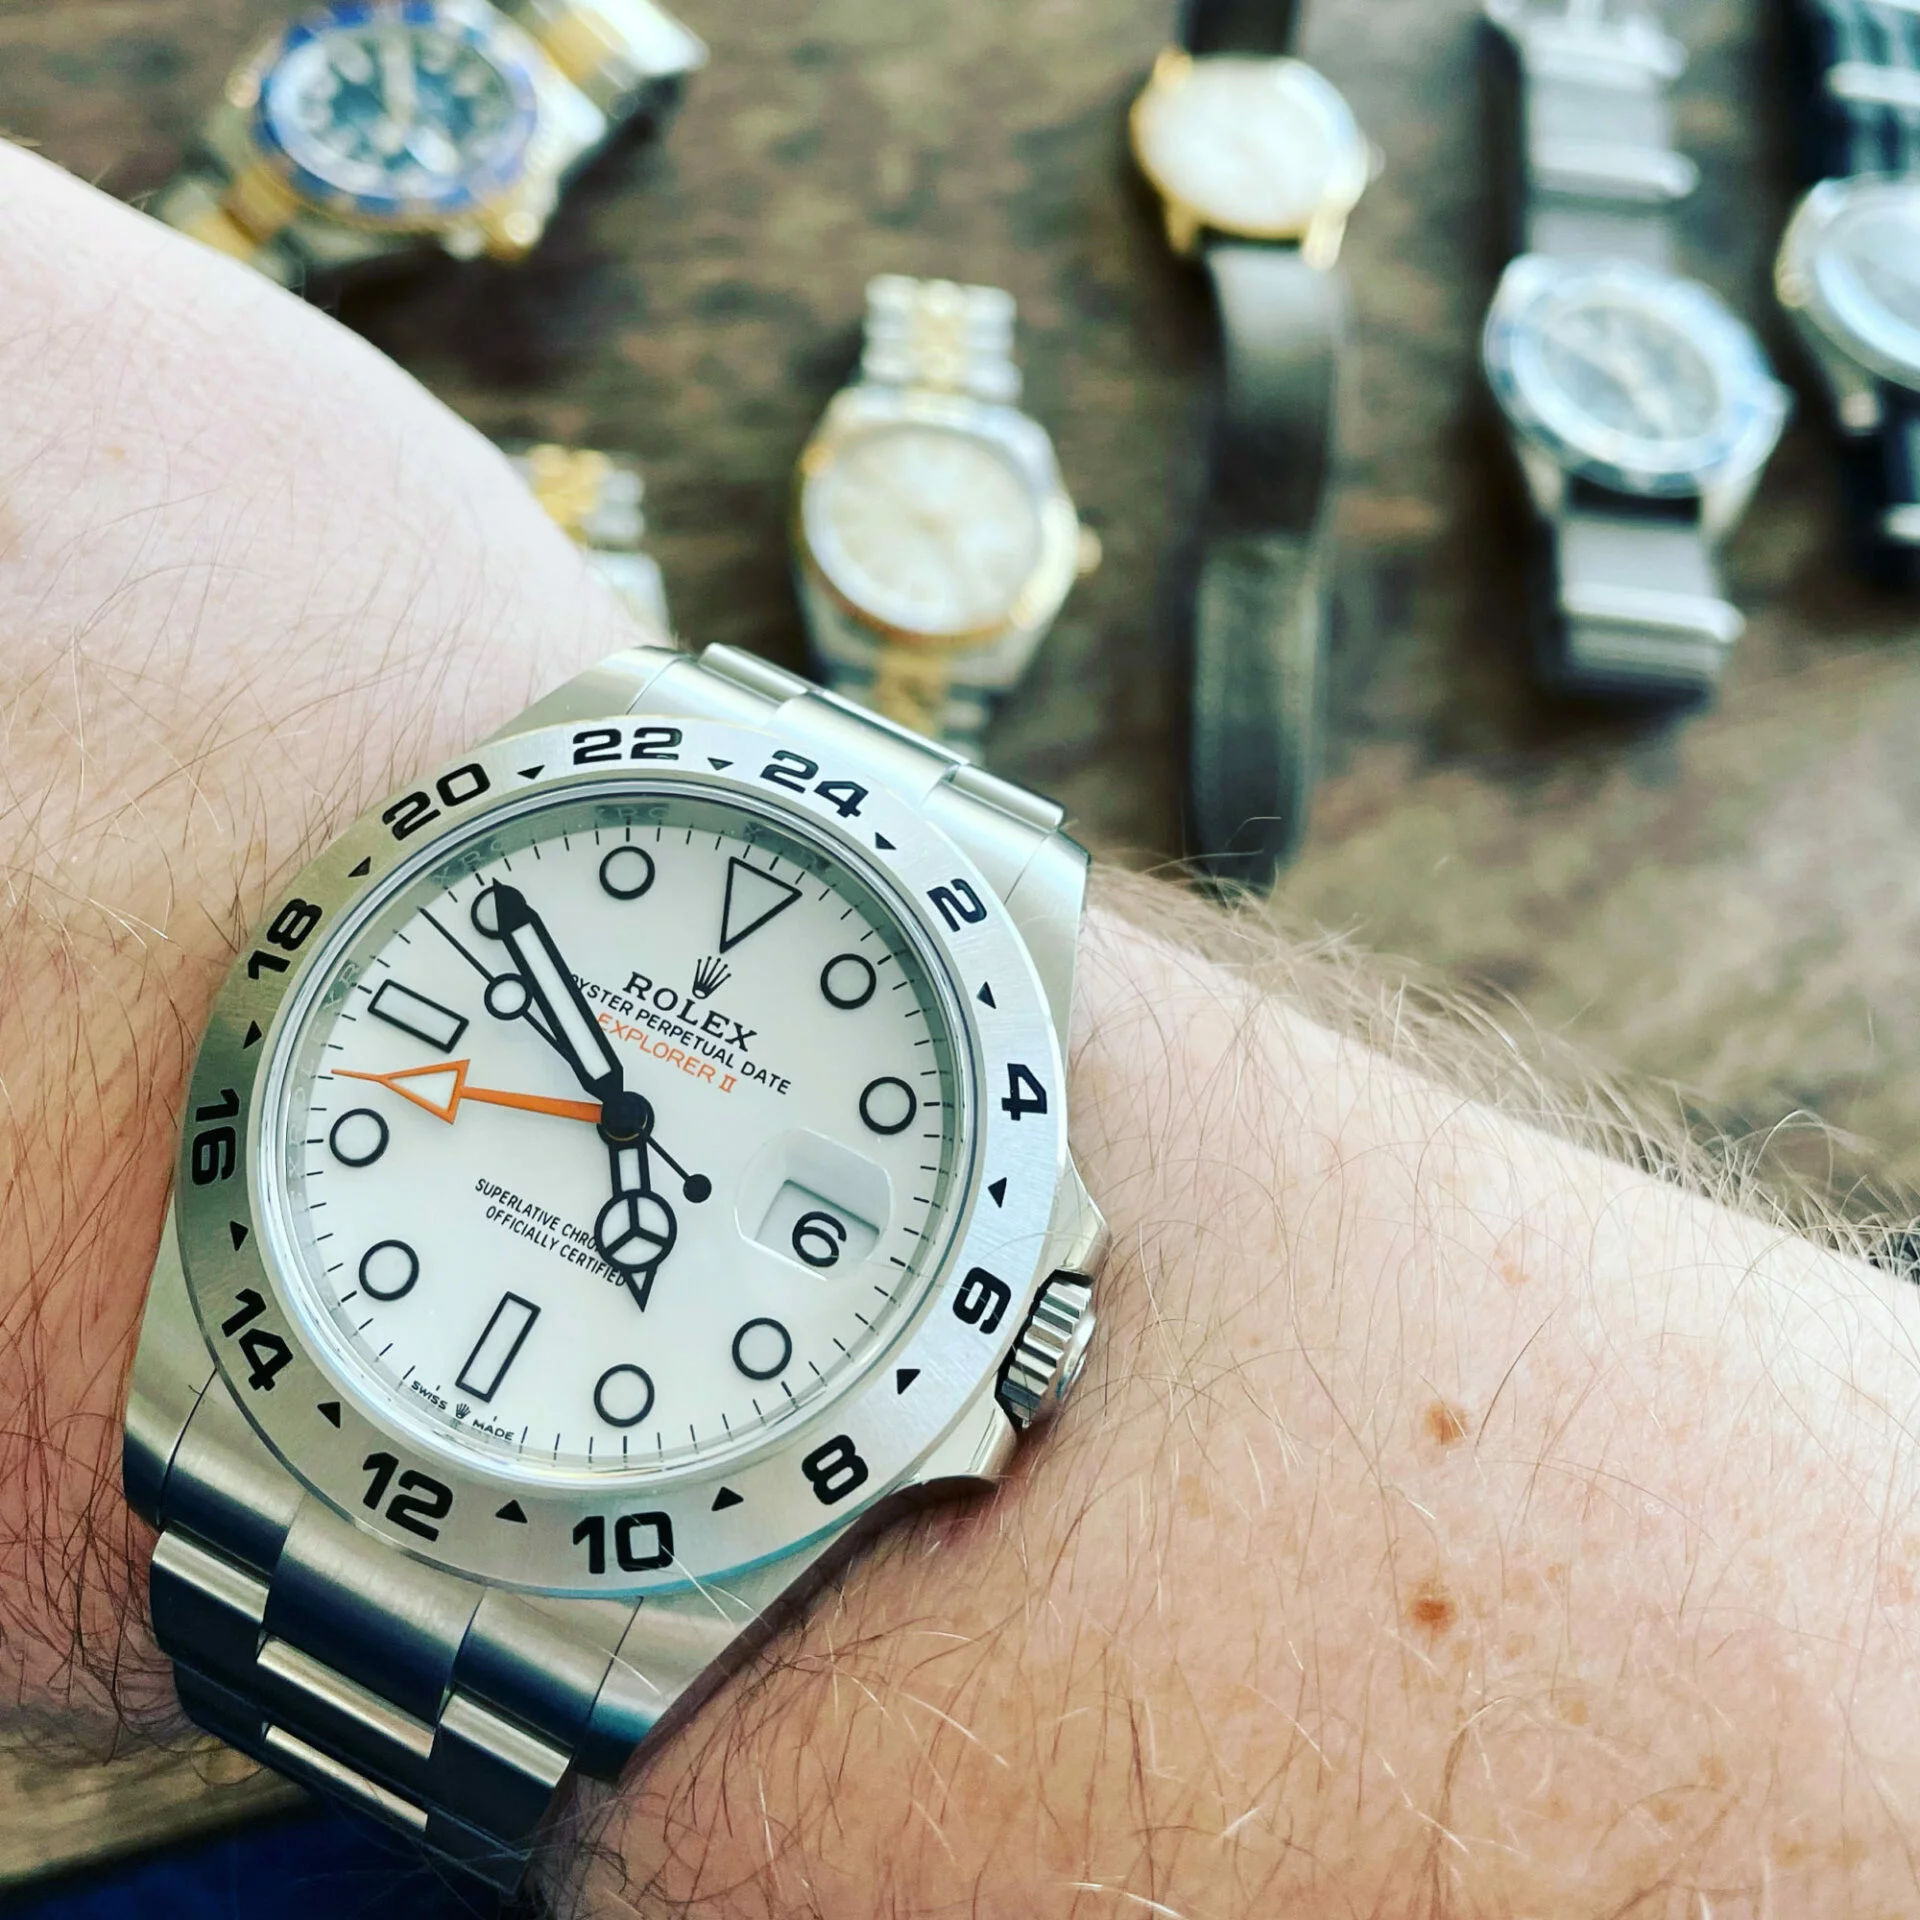 How the Rolex II won me over